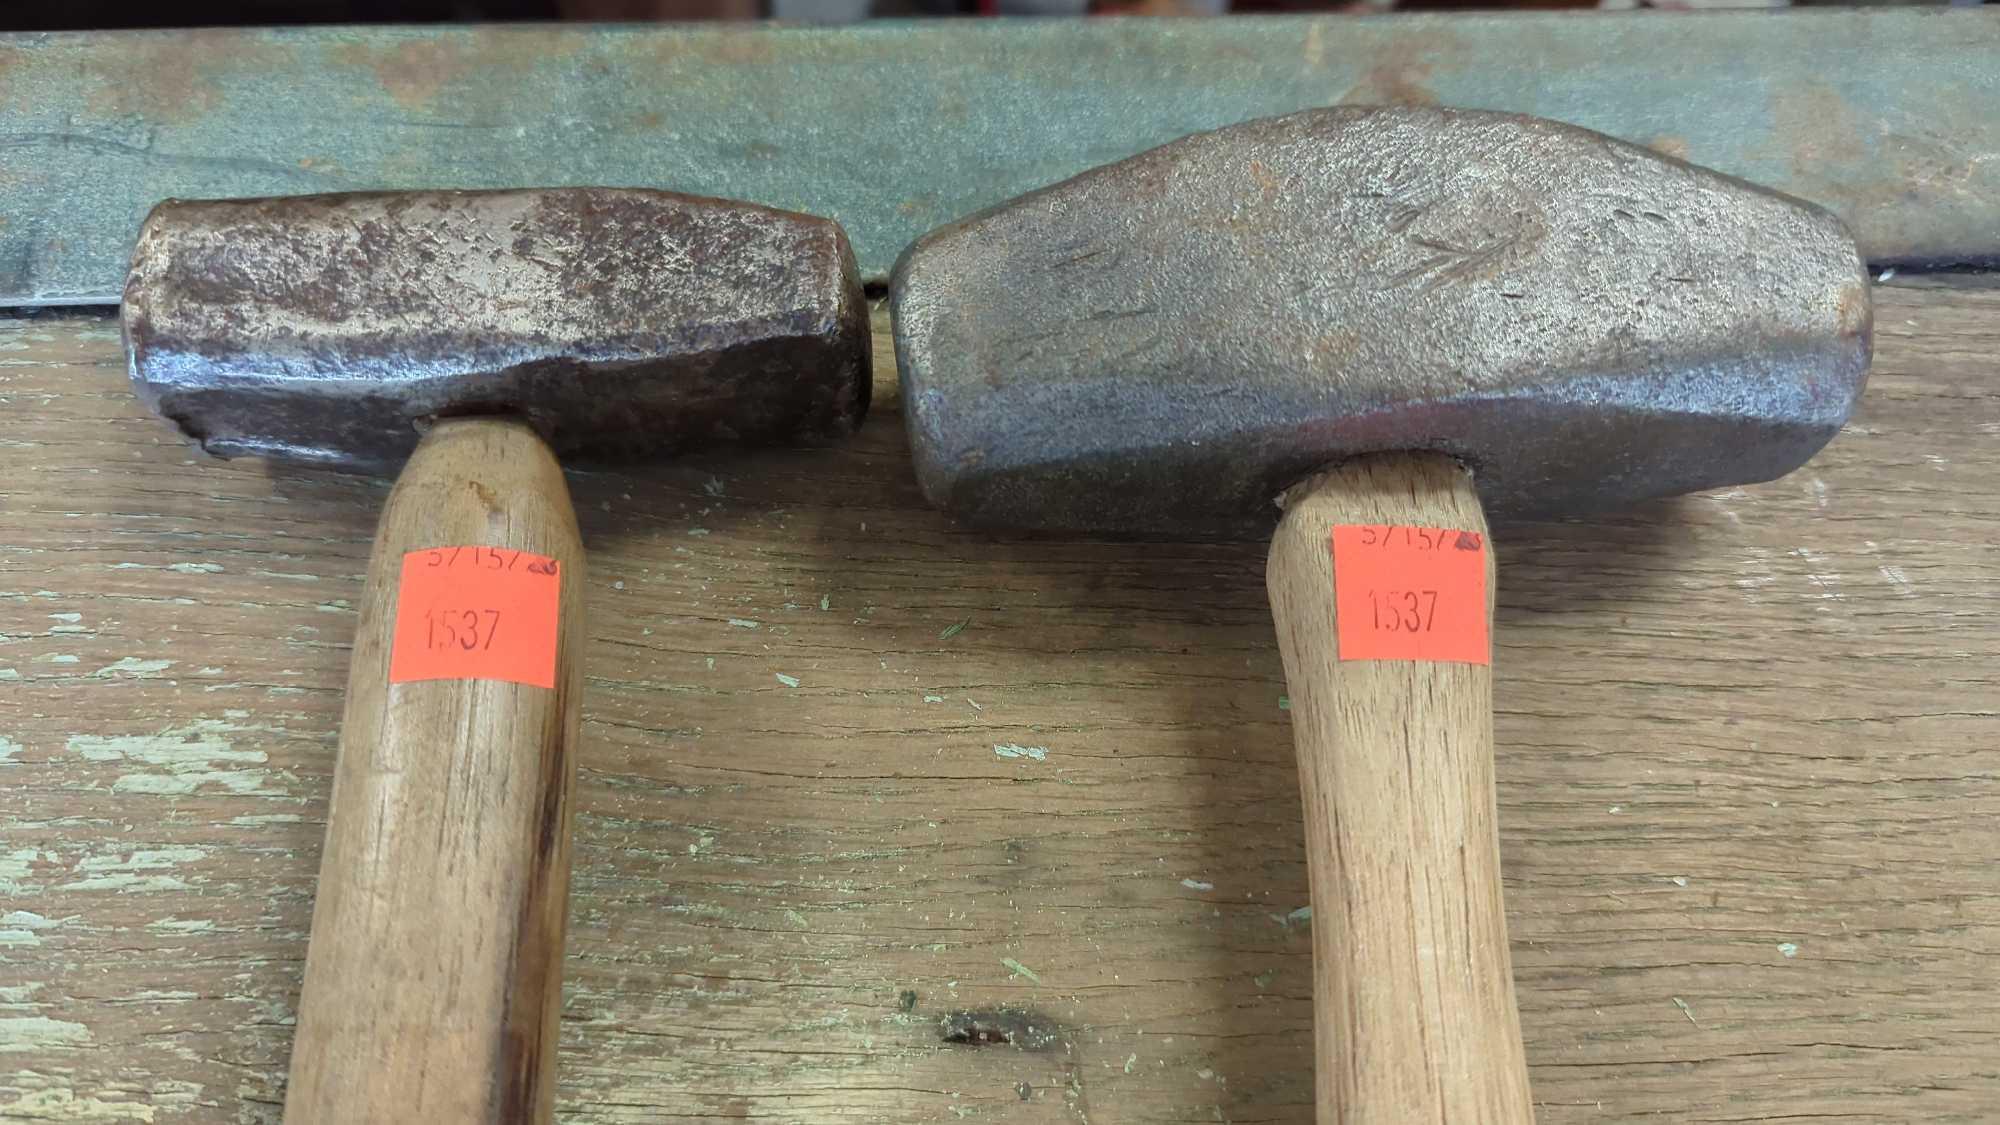 LOT OF 2 WOODEN HANDLE SLEDGEHAMMERS, UNKNOWN OF THE WEIGHT OF THE HEADS.